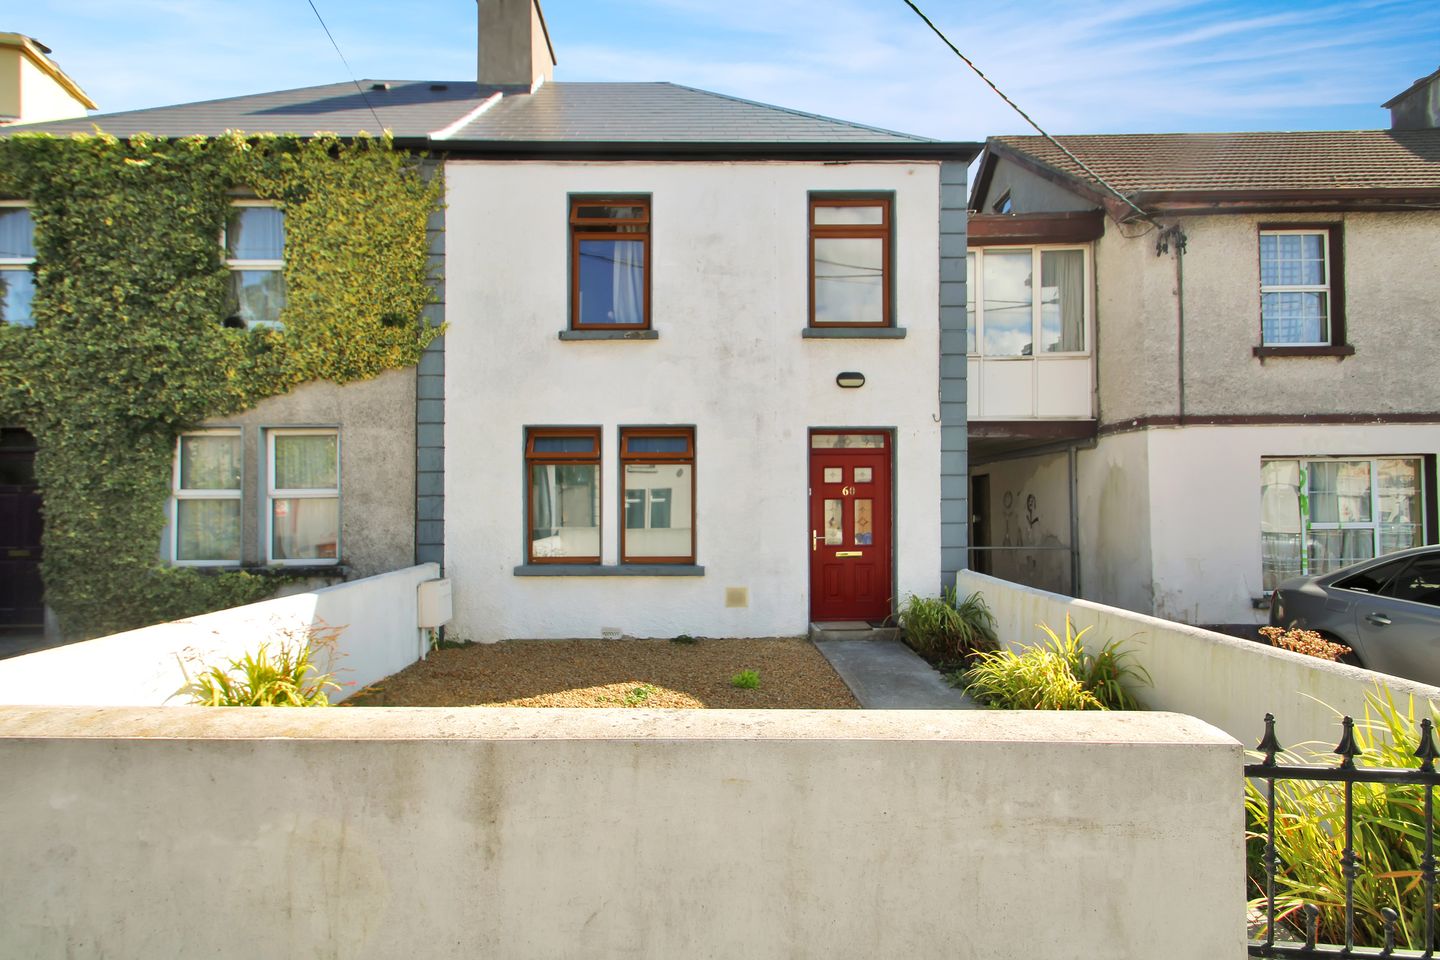 60 Newcastle Road, Newcastle, Co. Galway